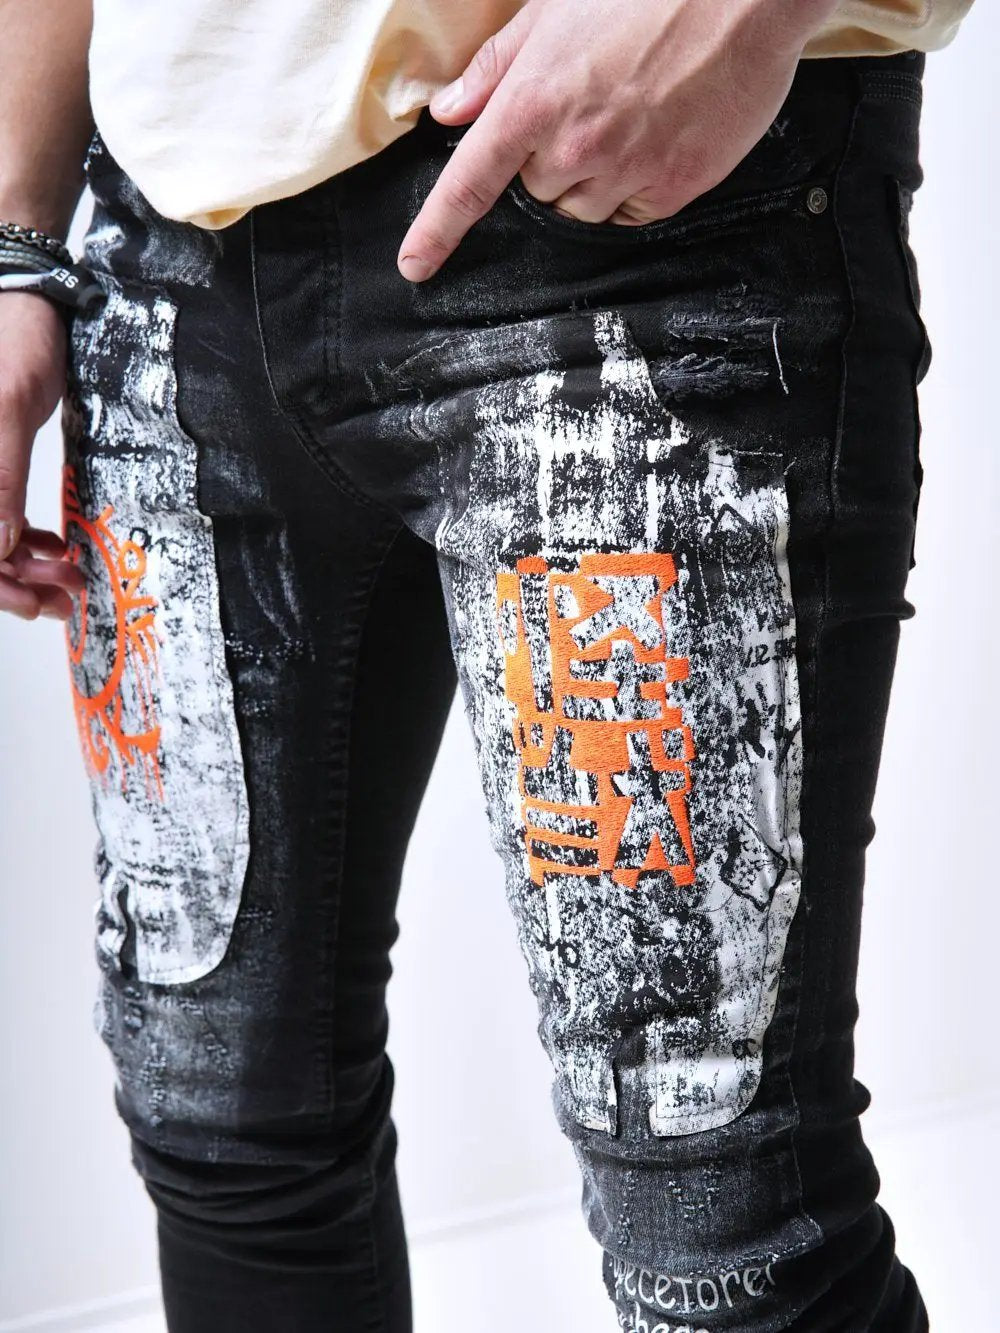 A man wearing a pair of SIXTY SIX jeans with graffiti on them.